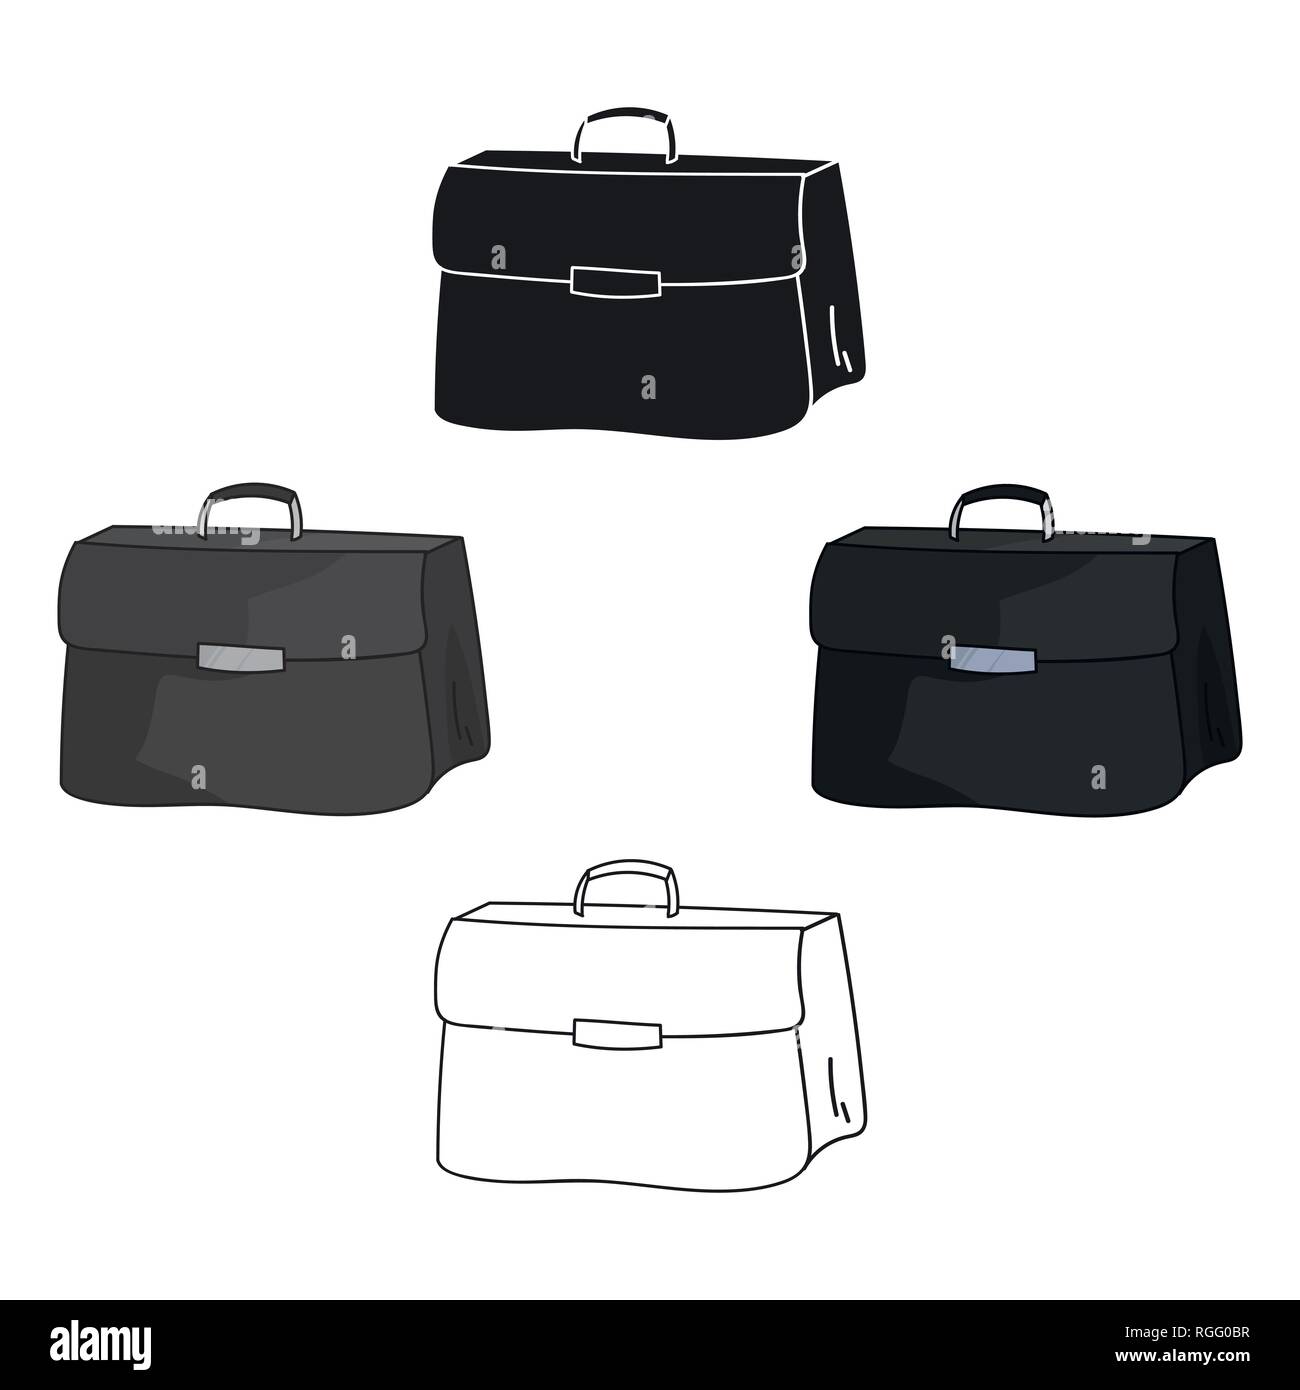 art,bag,baggage,brief,briefcase,business,businessman,cartoon ,case,concept,conference,design,diplomat,element,employer,icon,illustration,isolated,job,leather,lock,logo, luggage,management,manager,negetiations,office,portfolio,sign,suit,suitcase,symbol  ...